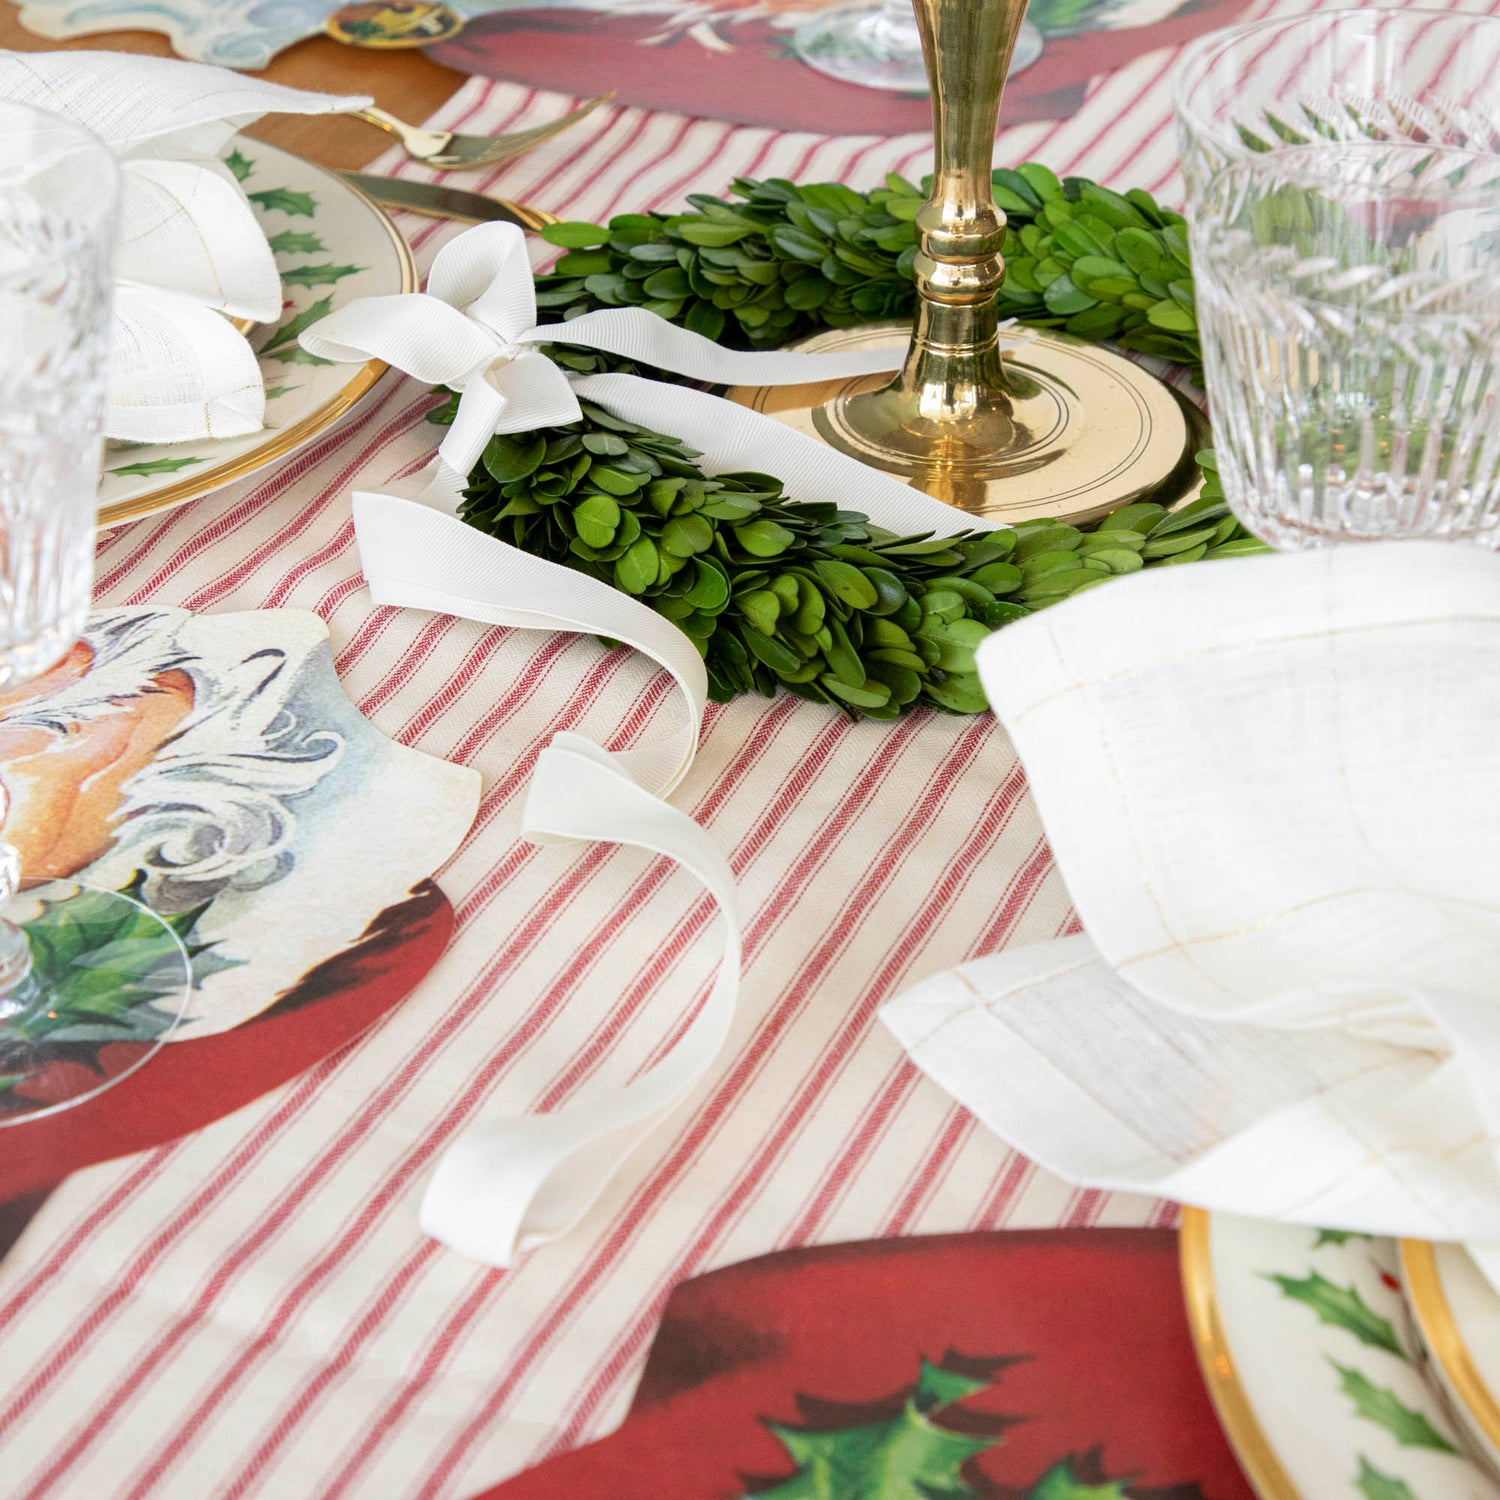 A beautiful Christmas table setting adorned with fresh Porch View Home boxwood wreaths with Cream Grosgrain Ribbon and botanical preserved napkins.